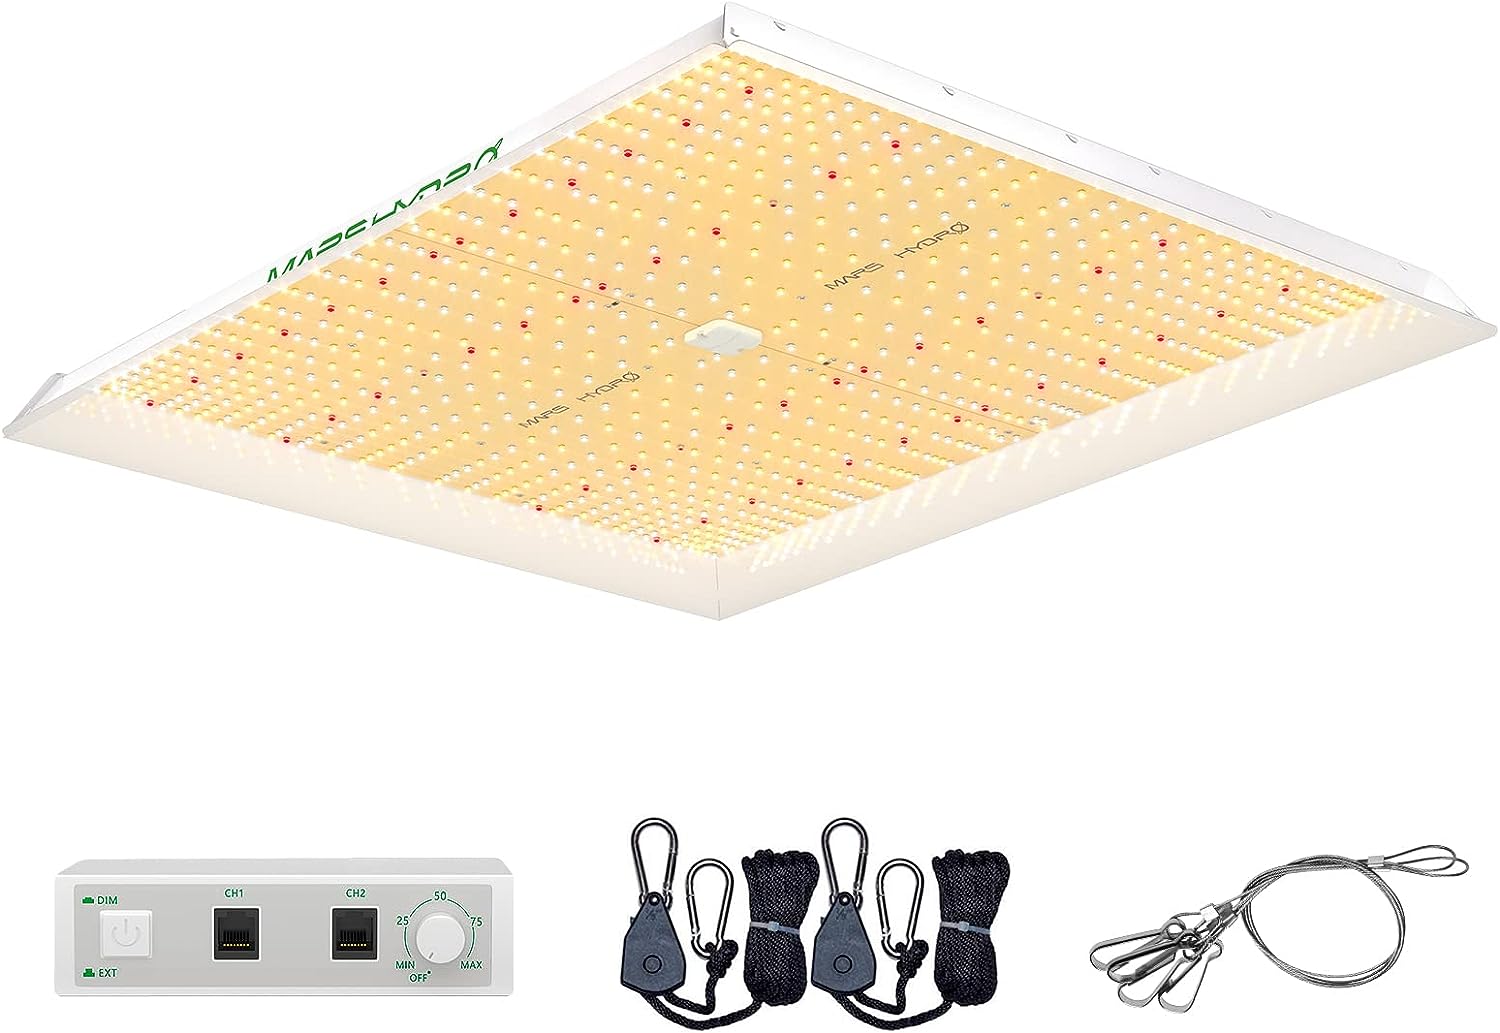 Mars Hydro 2023 New TS 3000 450W LED Grow Light for Indoor Plants Full Spectrum Commercial Grow Daisy Chain Plant Growing Lamp for 4x4 5x5ft Greenhouse  Tent